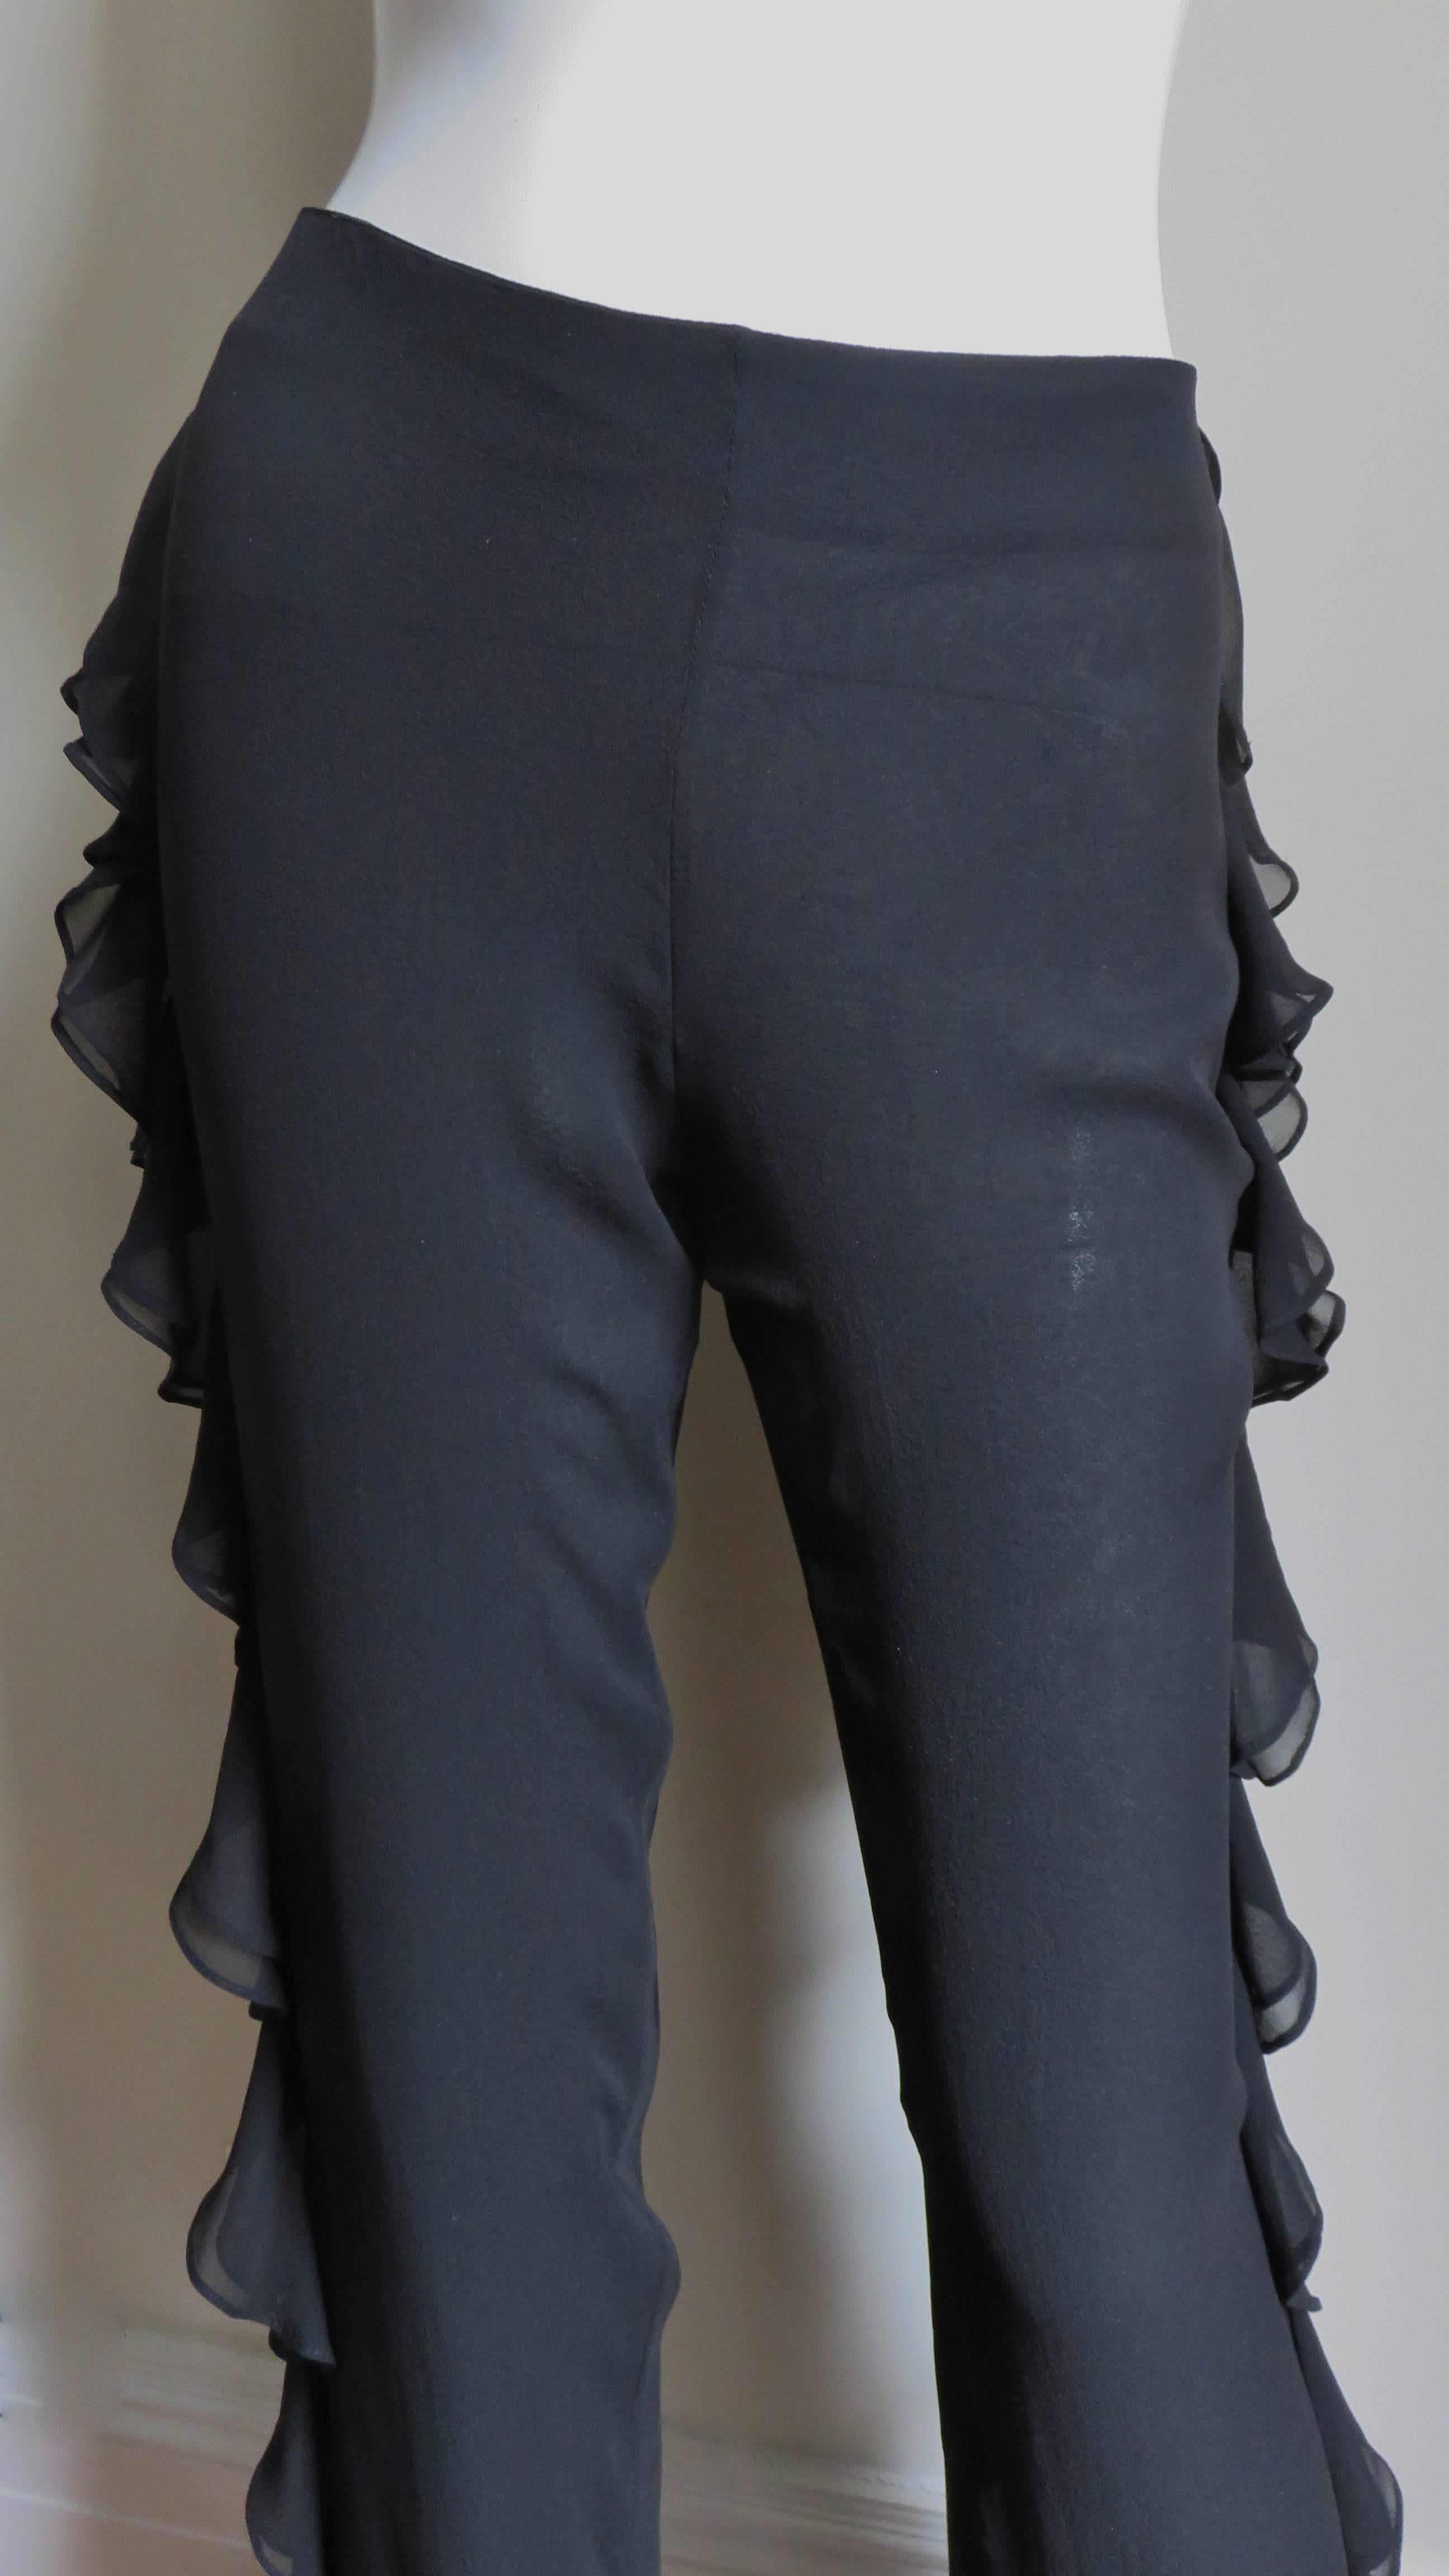 pants with ruffles on the side